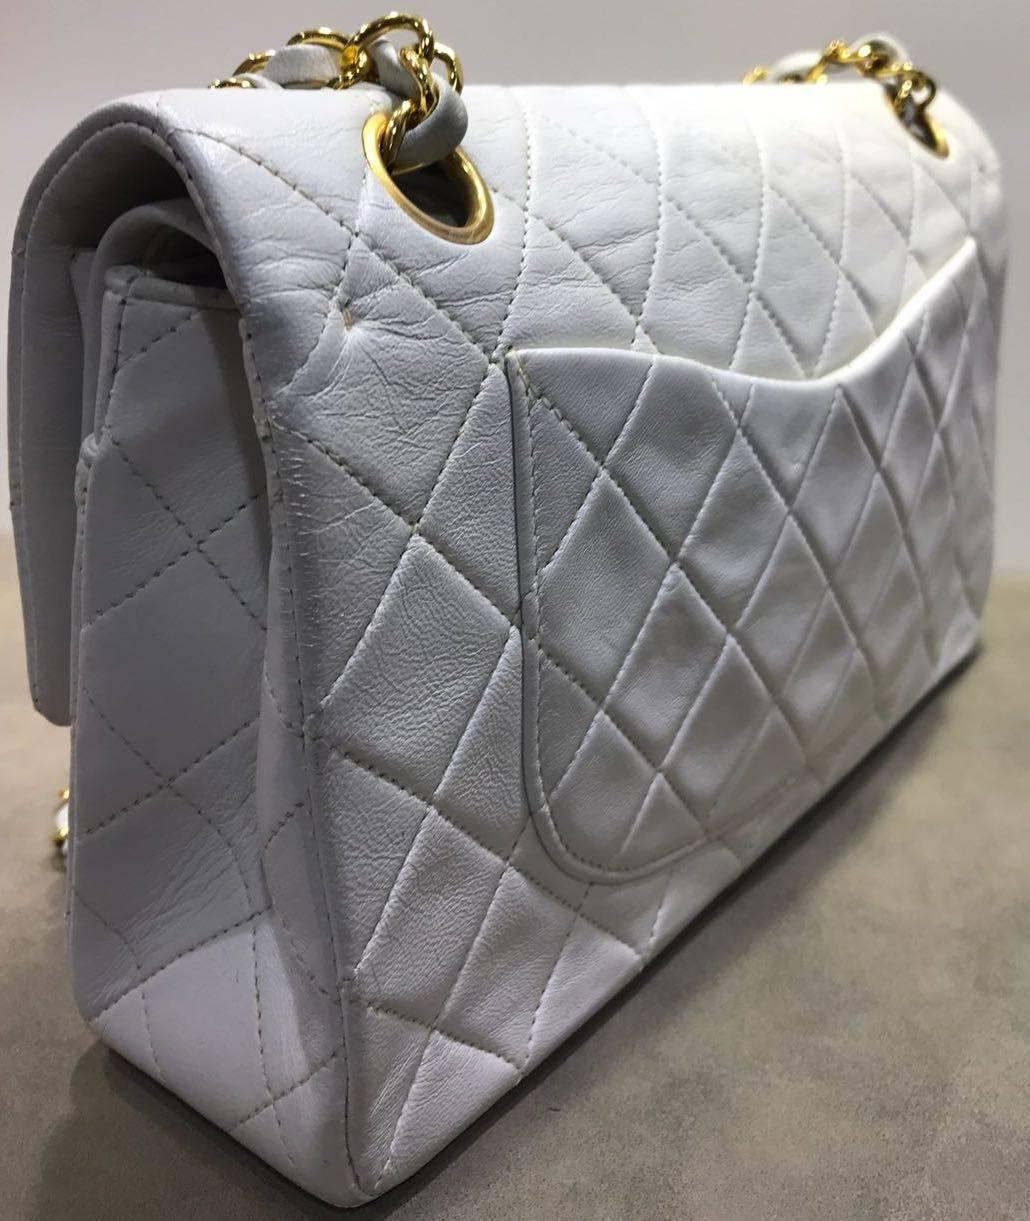 - Vintage 90s Chanel classic white quilted lambskin gold chain flap bag with gold "CC" closing. Ready for some classic white and gold Chanel in the spring. This bag is in good preowned  condition!

- Made in France. 

- Size: W23cm x H15cm